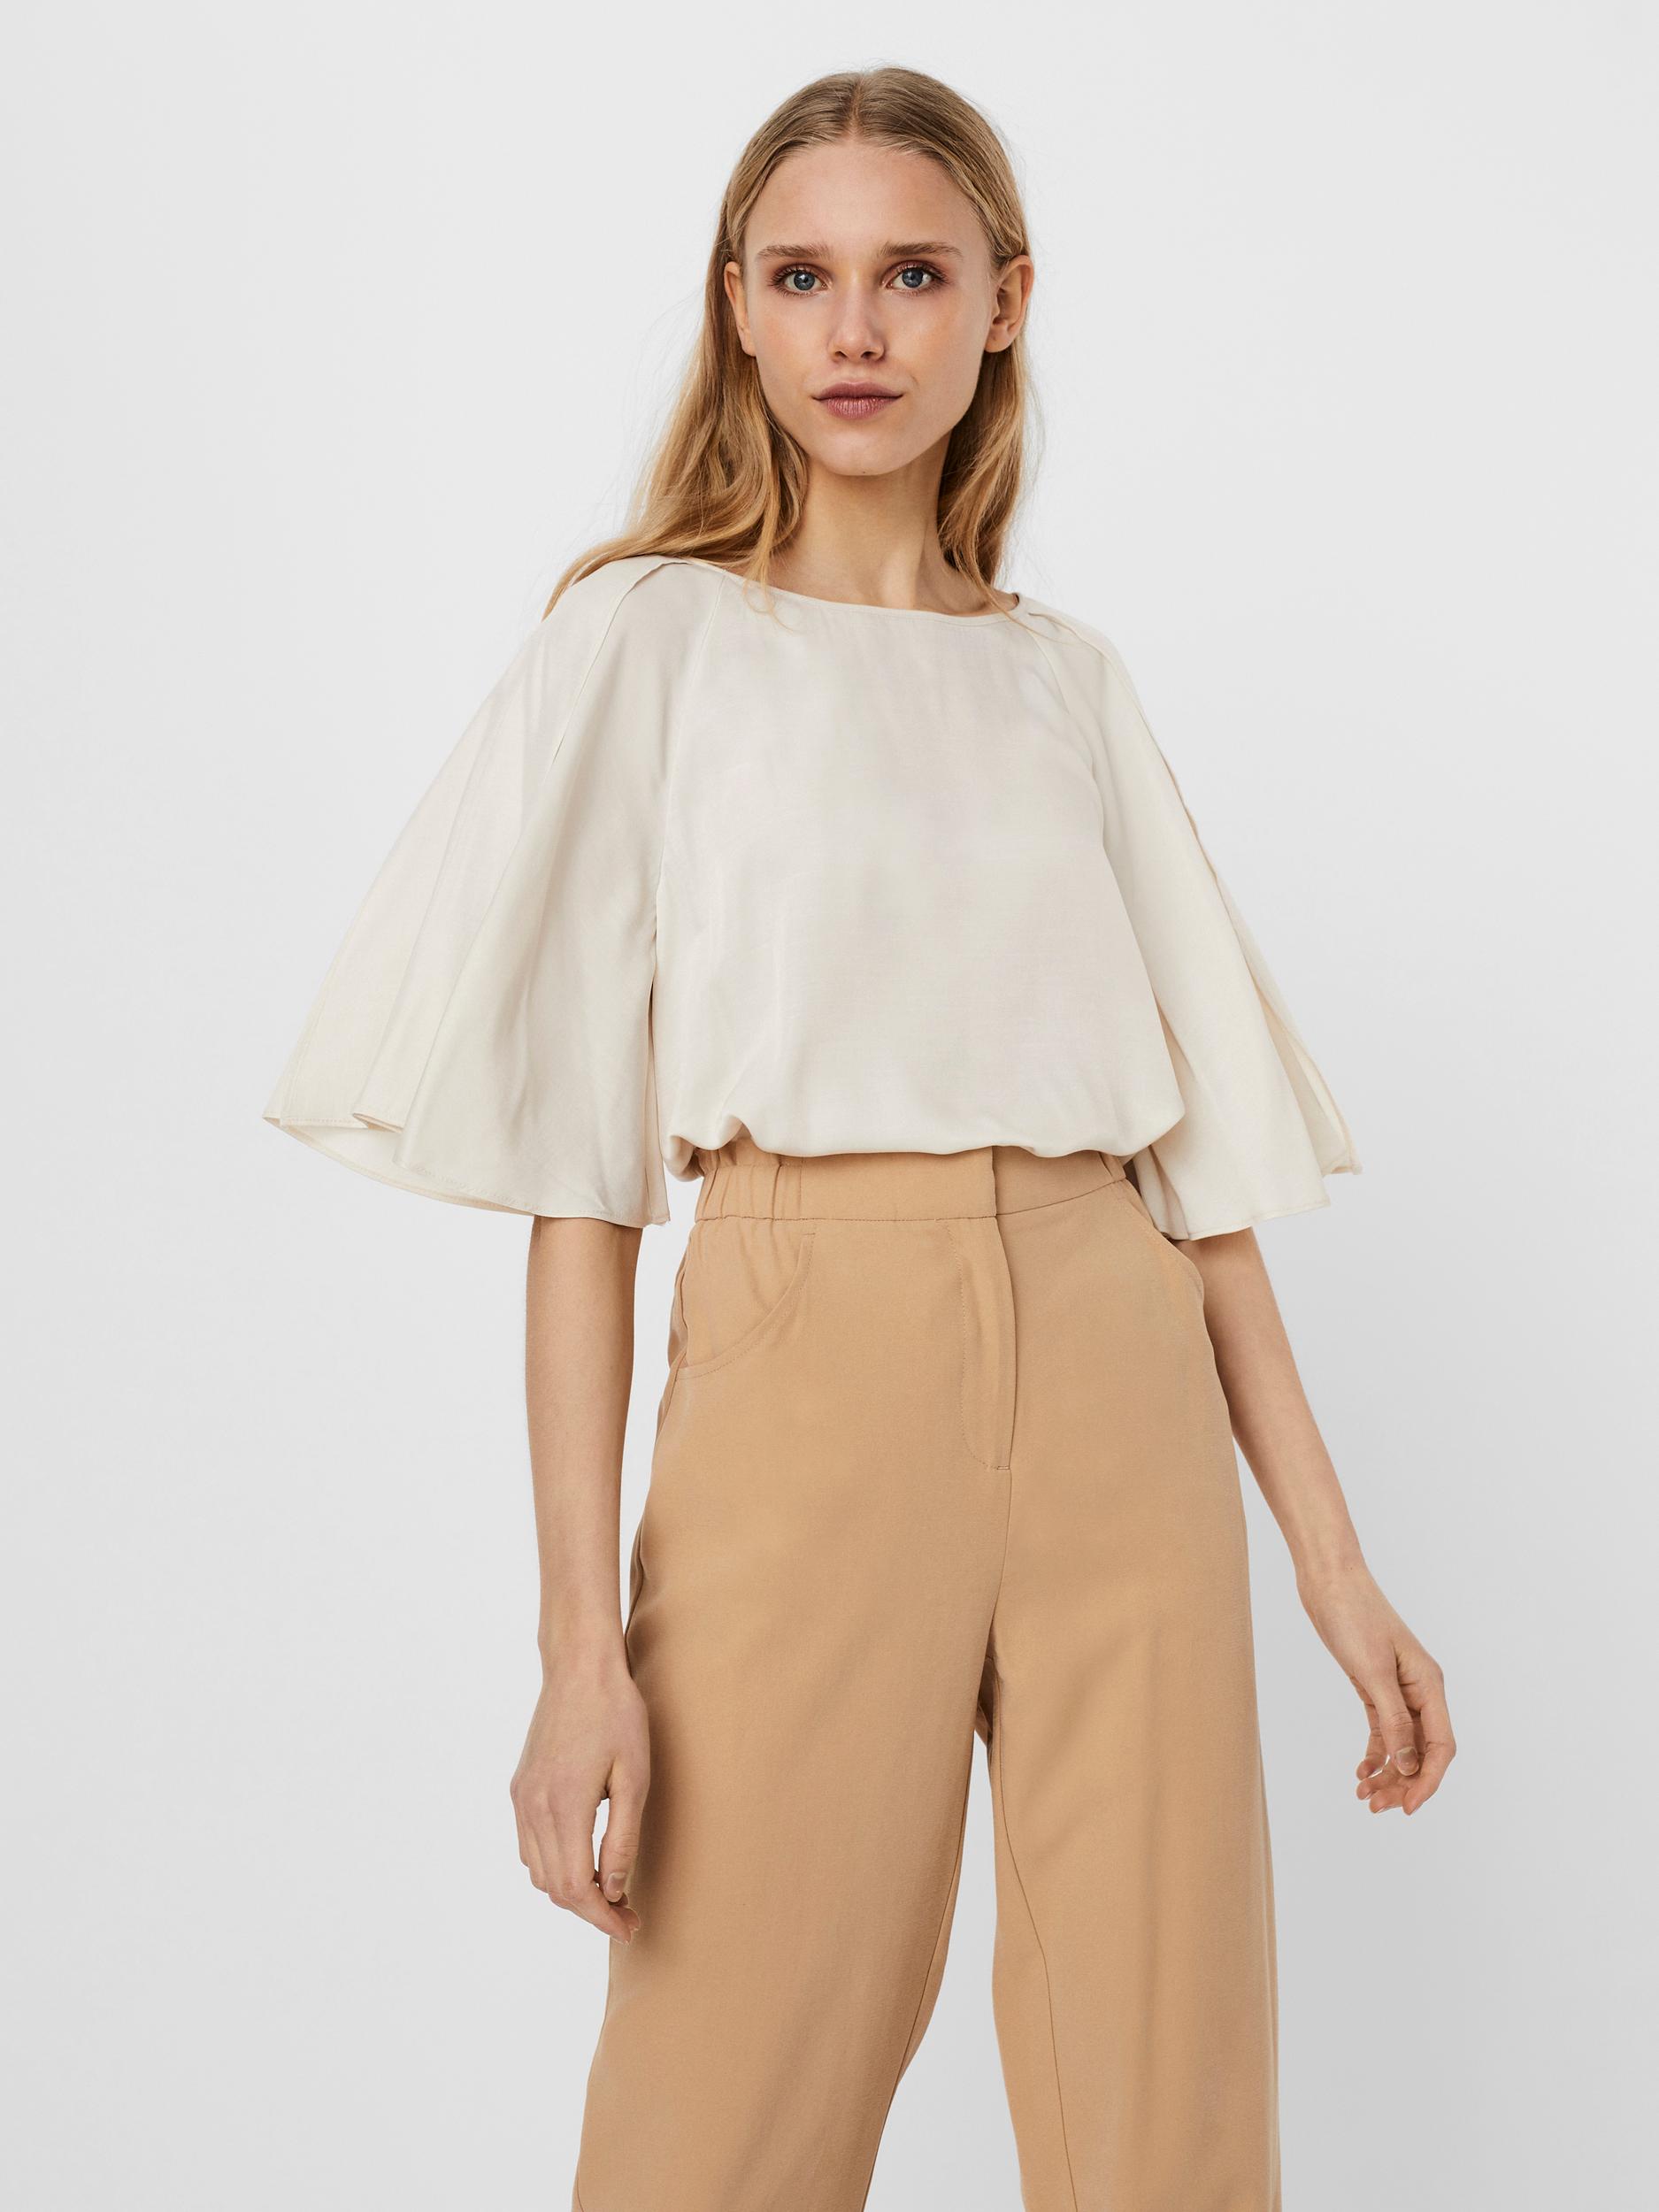 Bonnie butterfly sleeves blouse, BIRCH, large